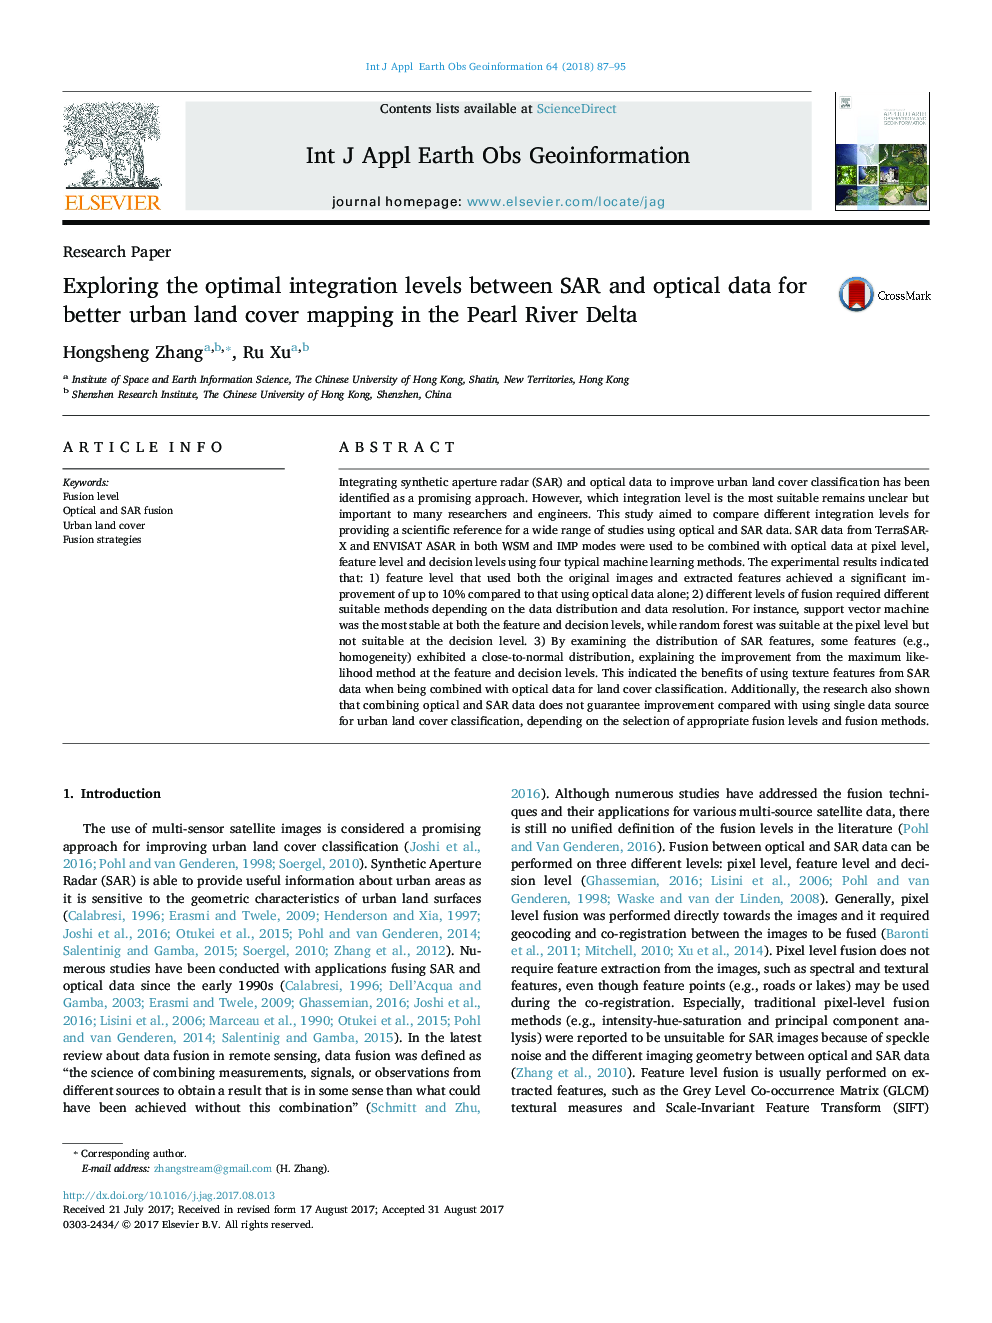 Exploring the optimal integration levels between SAR and optical data for better urban land cover mapping in the Pearl River Delta